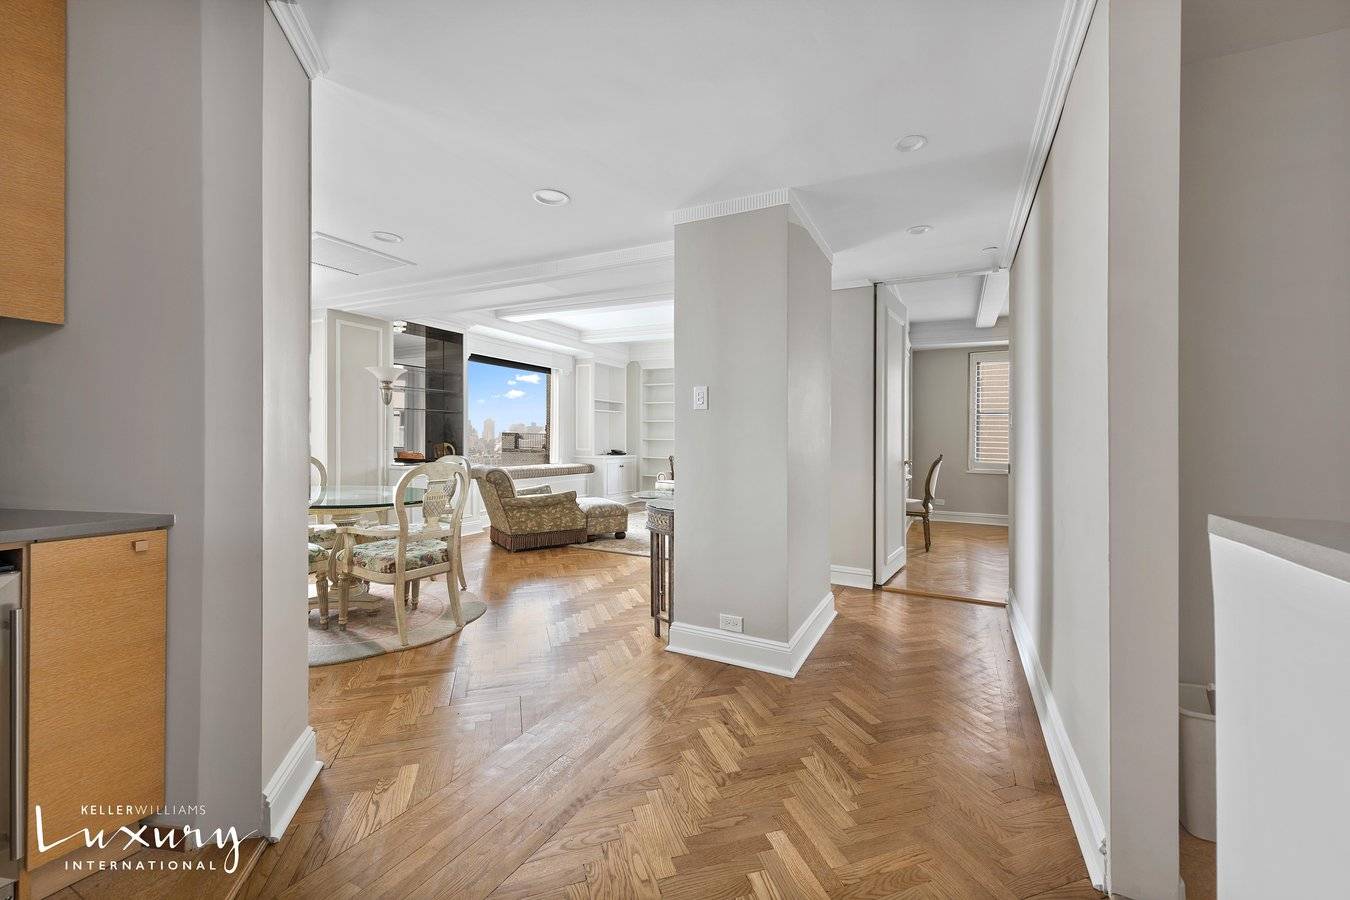 Enjoy five star hotel services when you purchase this charming one bedroom one and one half bathroom apartment in the renowned JW Marriott Essex House located on Central Park South.